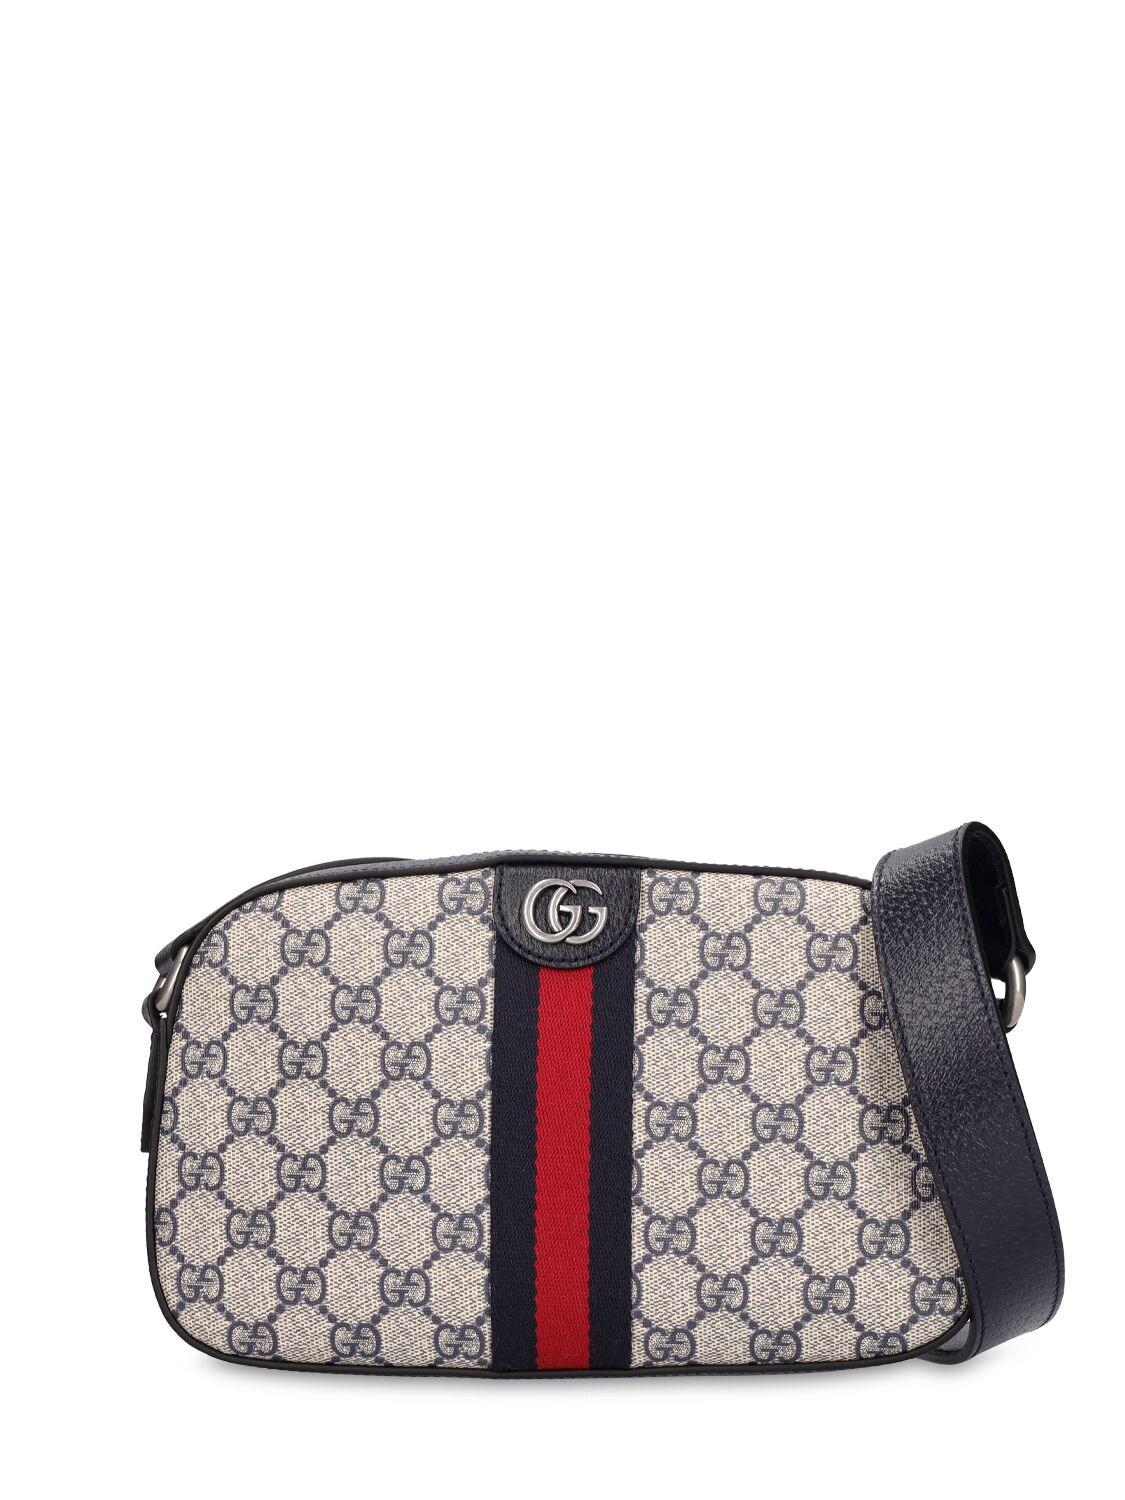 Ophidia GG small shoulder bag in blue GG Supreme